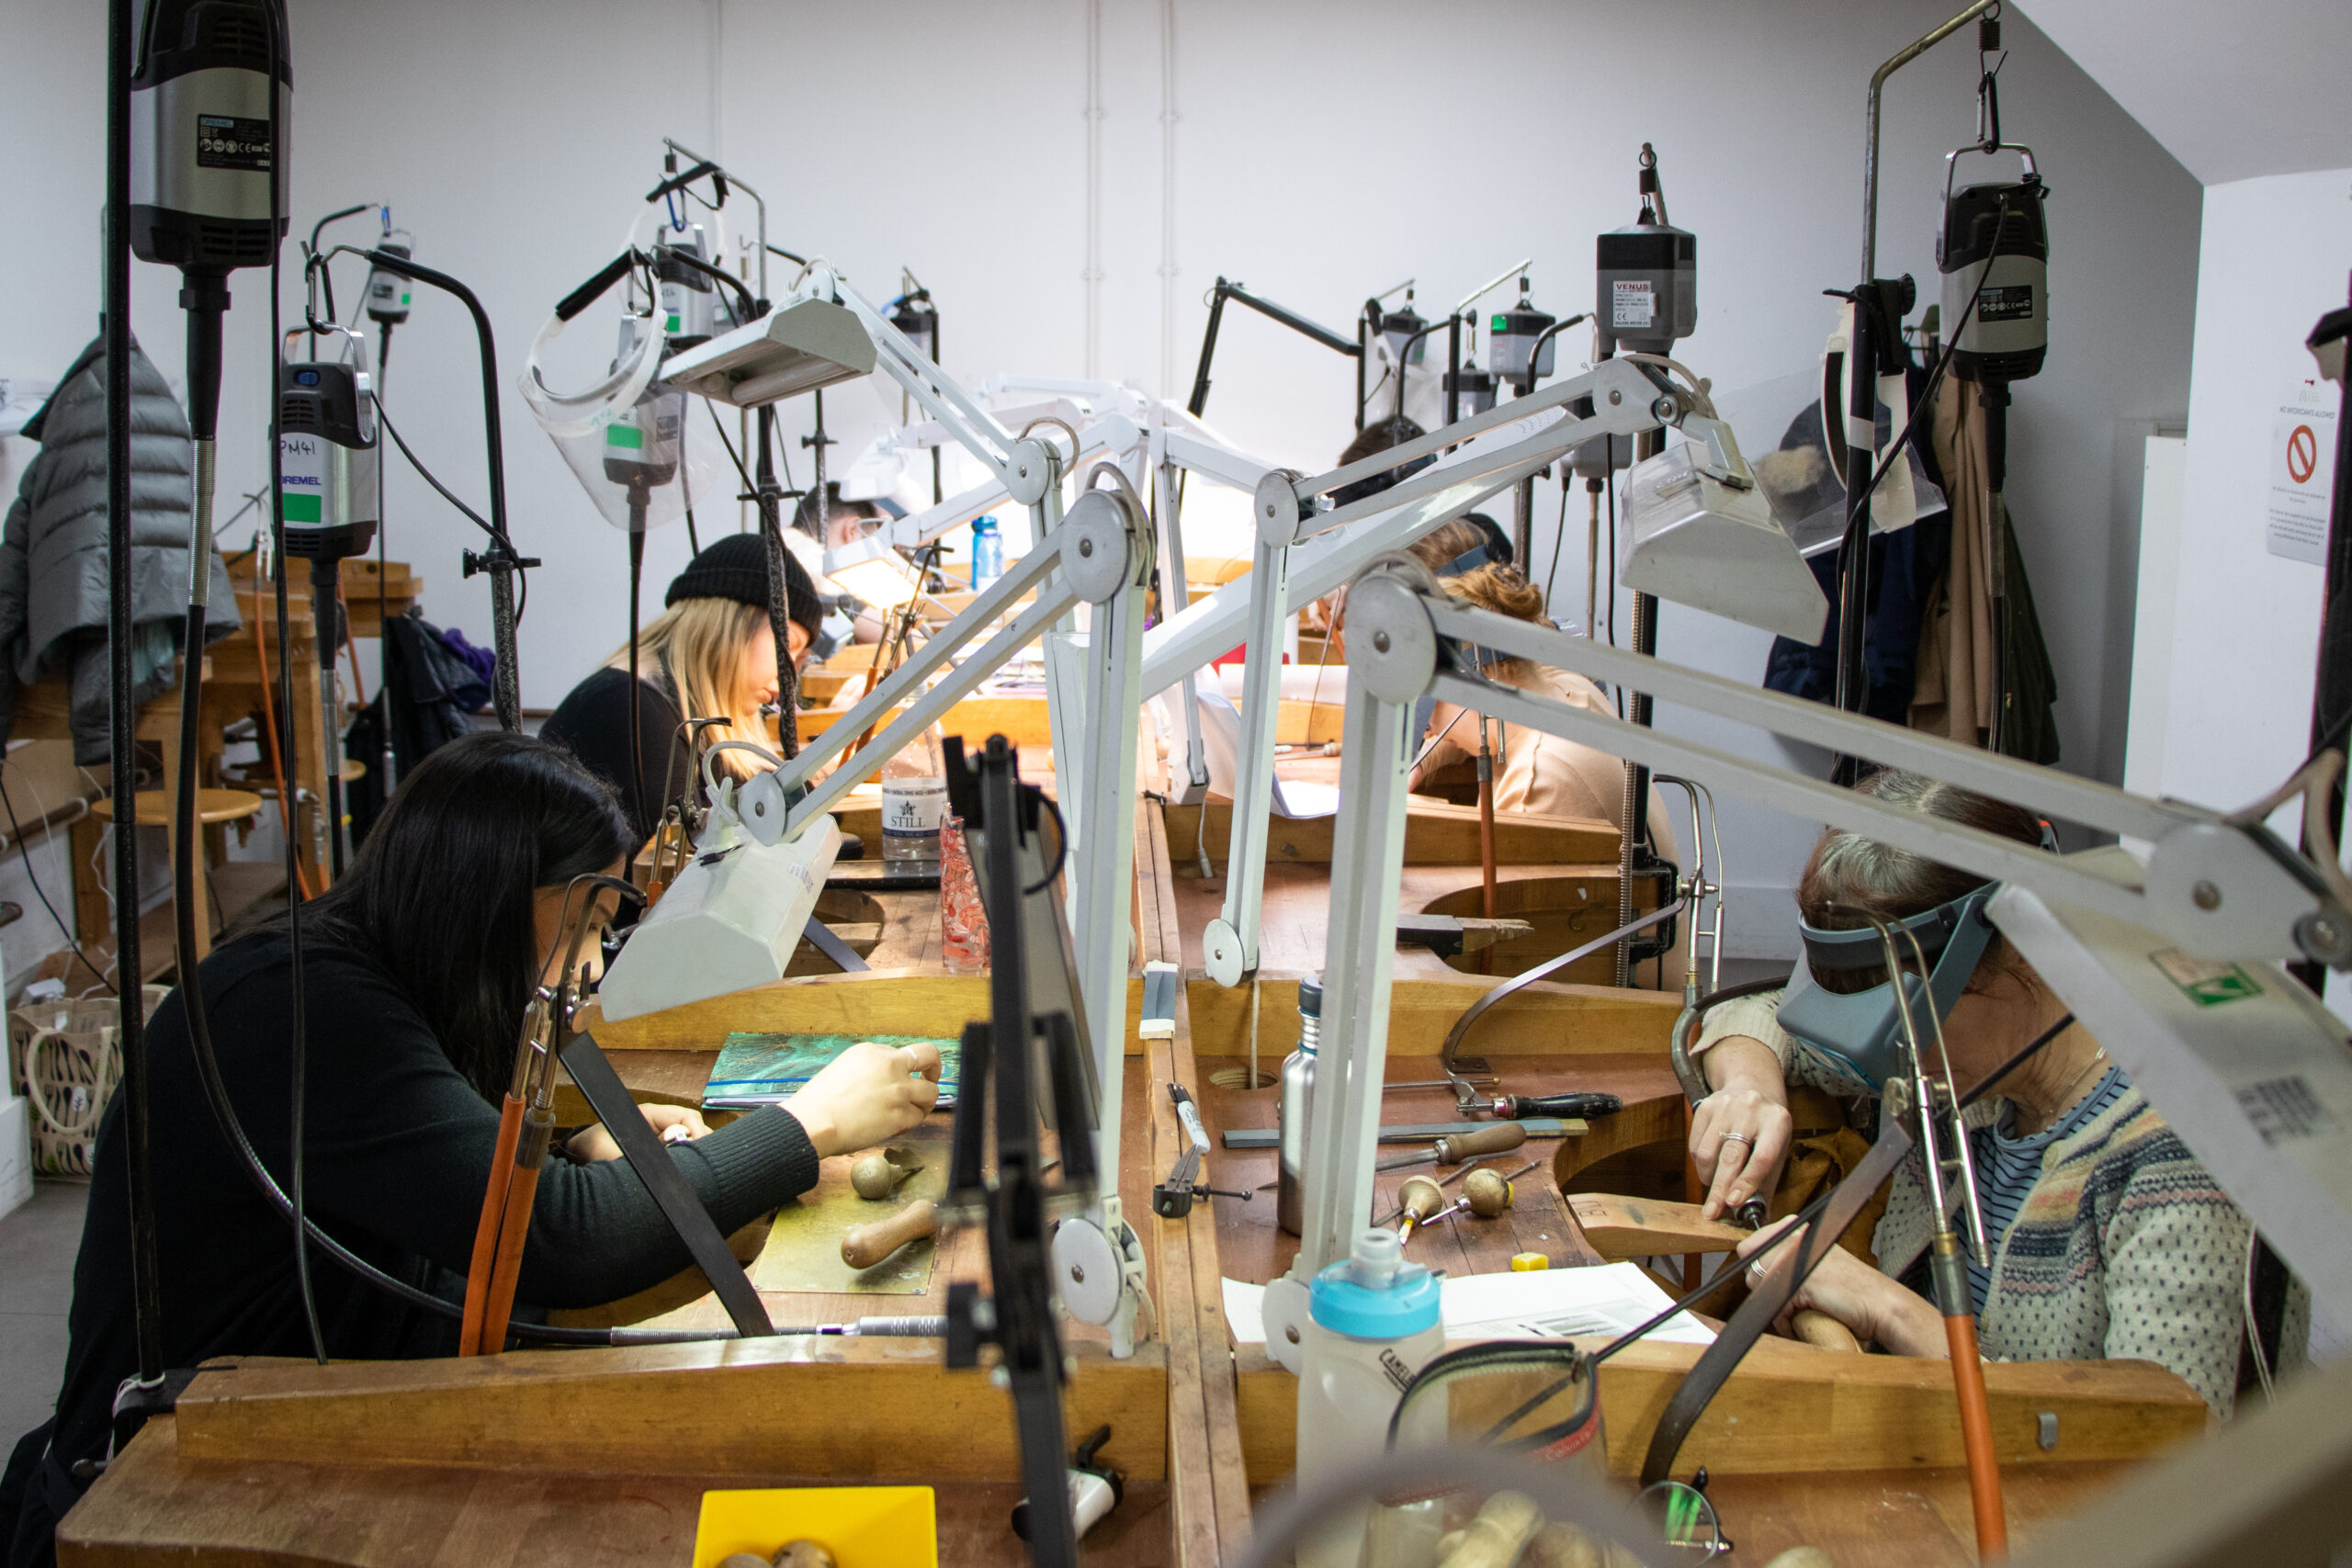 A Jewellery workshop with multiple students working.